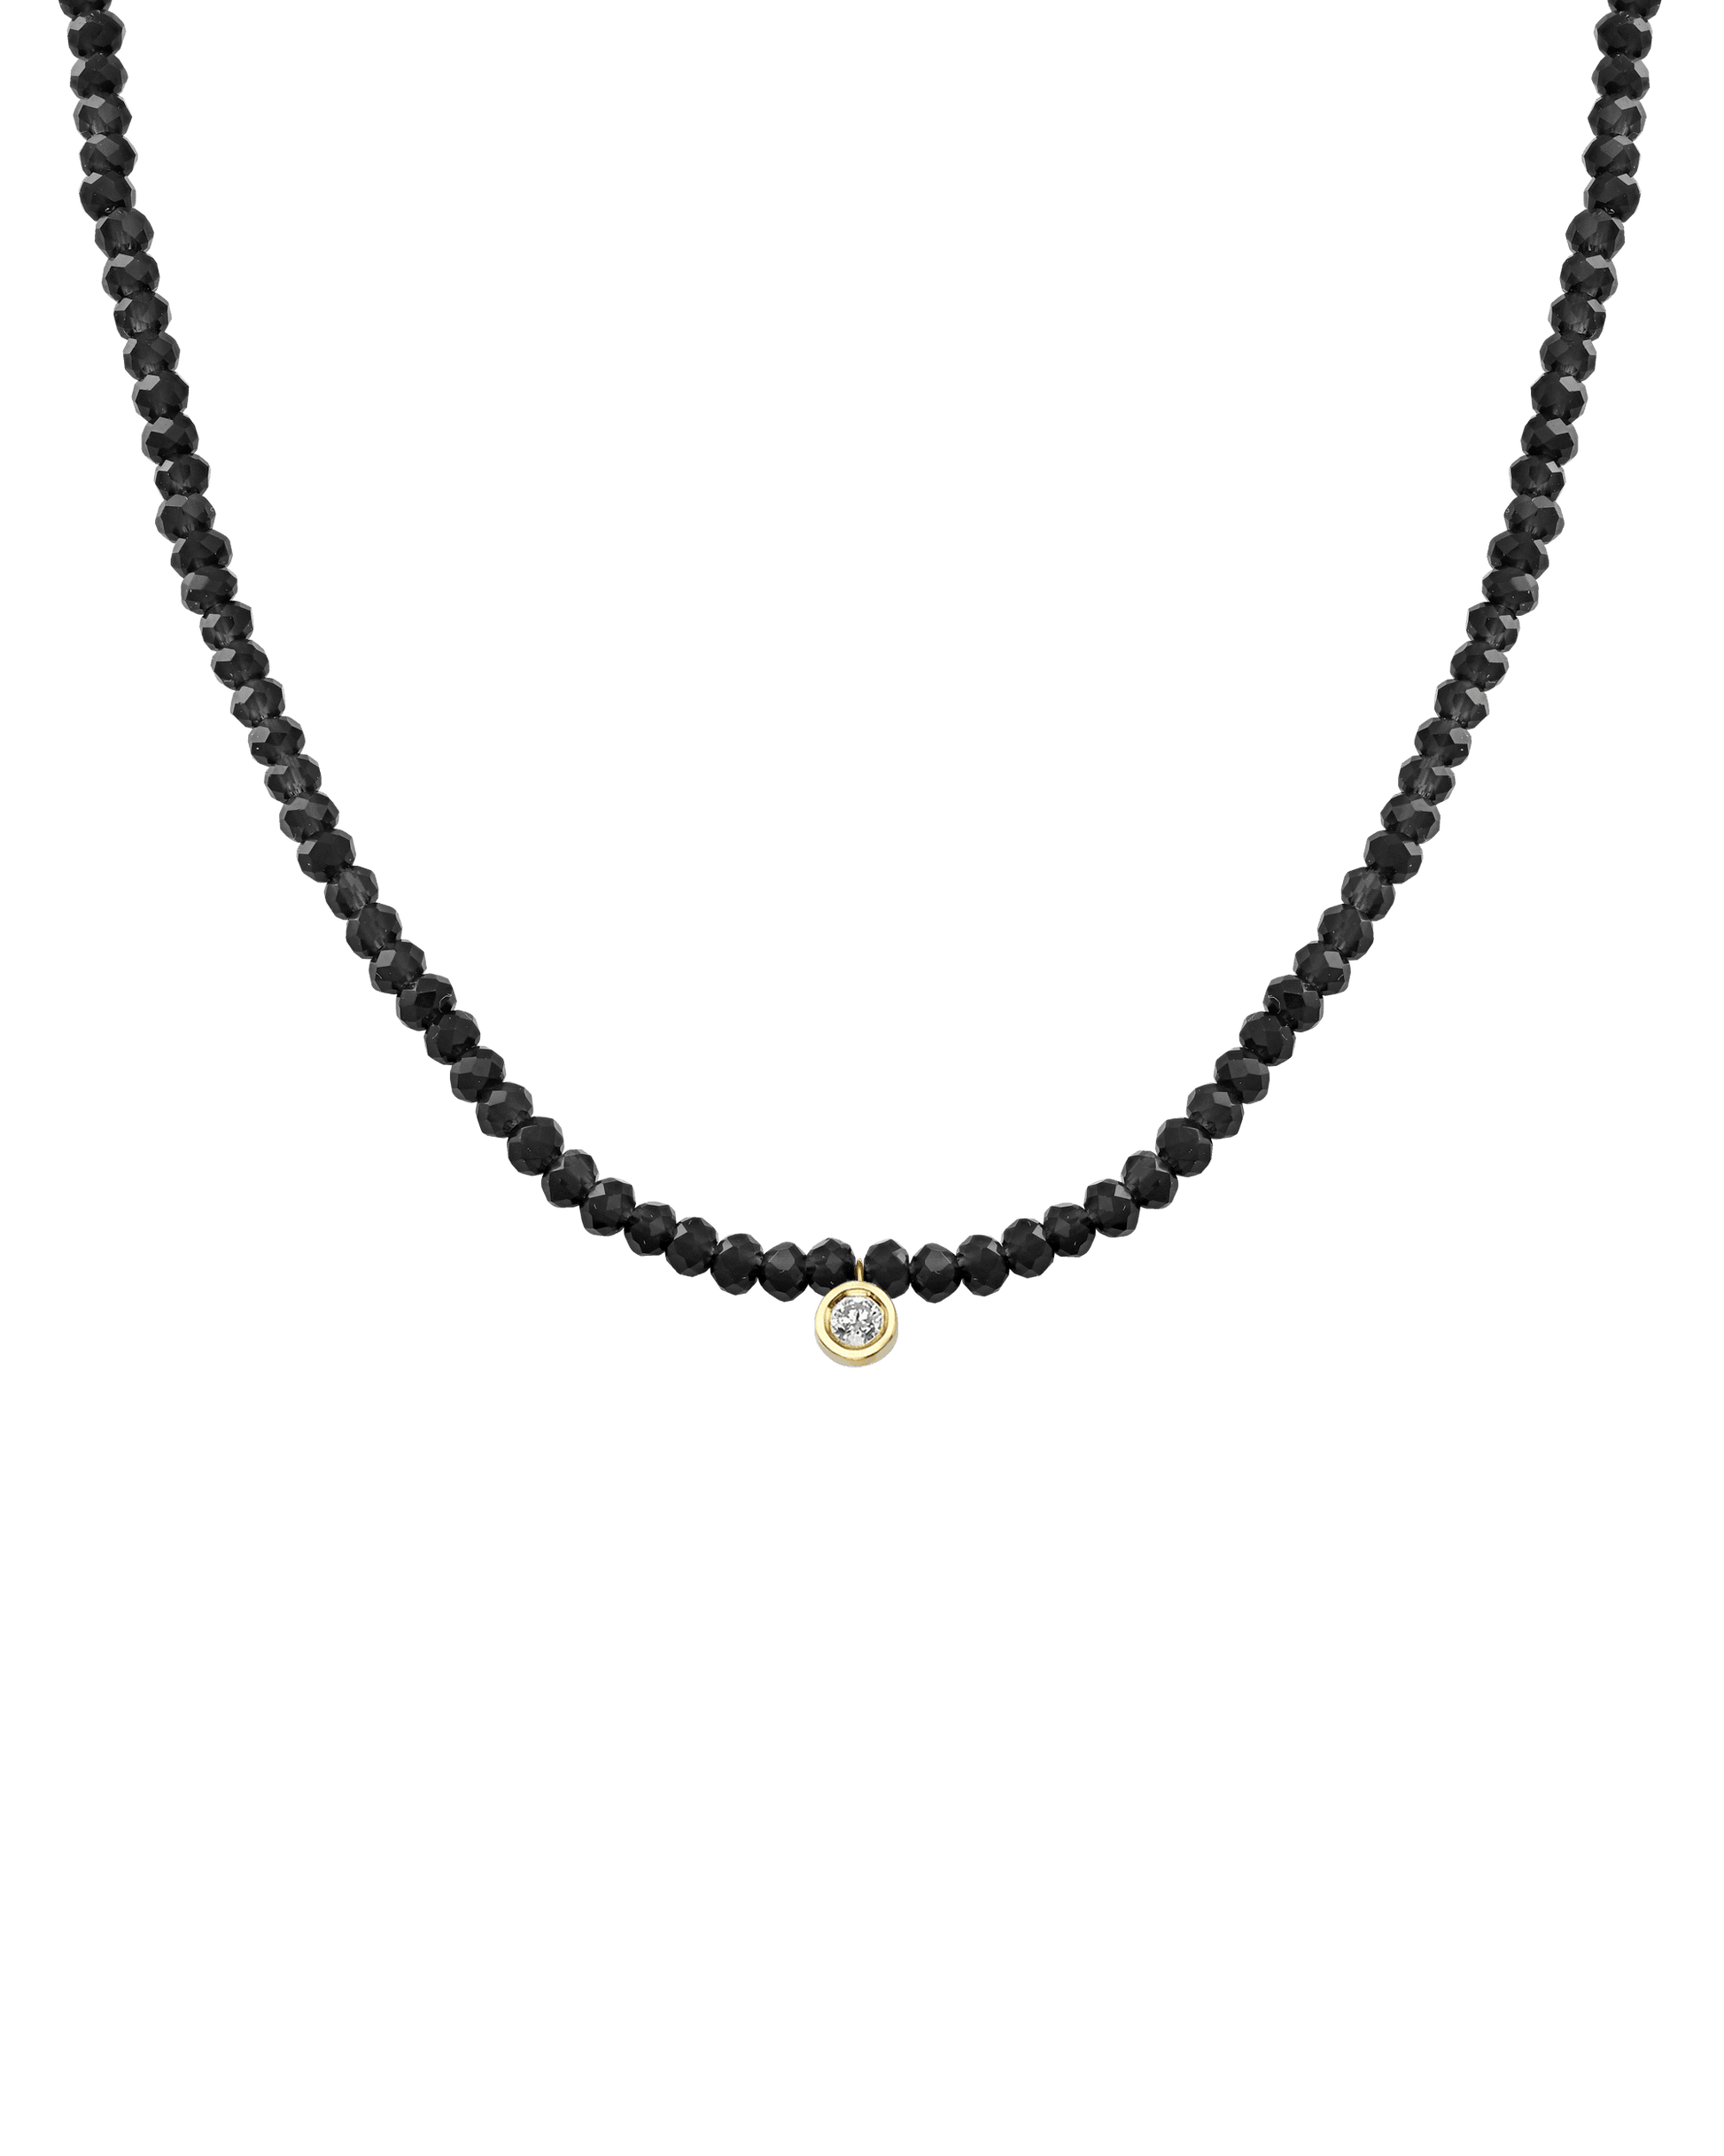 Apatite Gemstone & Diamond Necklace - 14K Yellow Gold Necklaces 14K Solid Gold Glass Beads Black Spinnel Medium: 0.05ct 14"